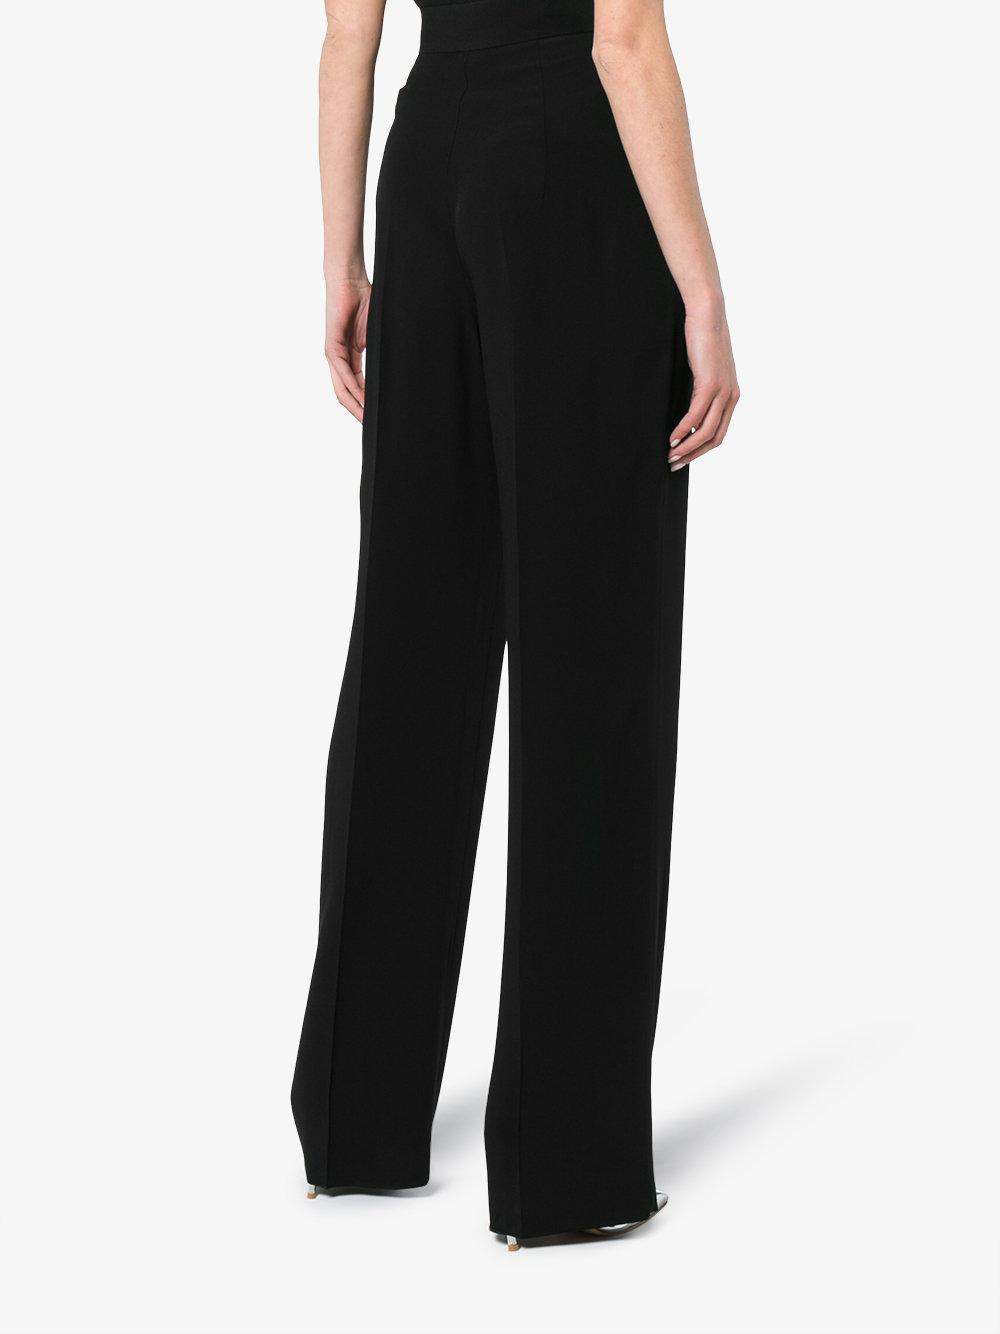 Christopher Kane Synthetic Crystal High Waisted Trousers in Black - Lyst